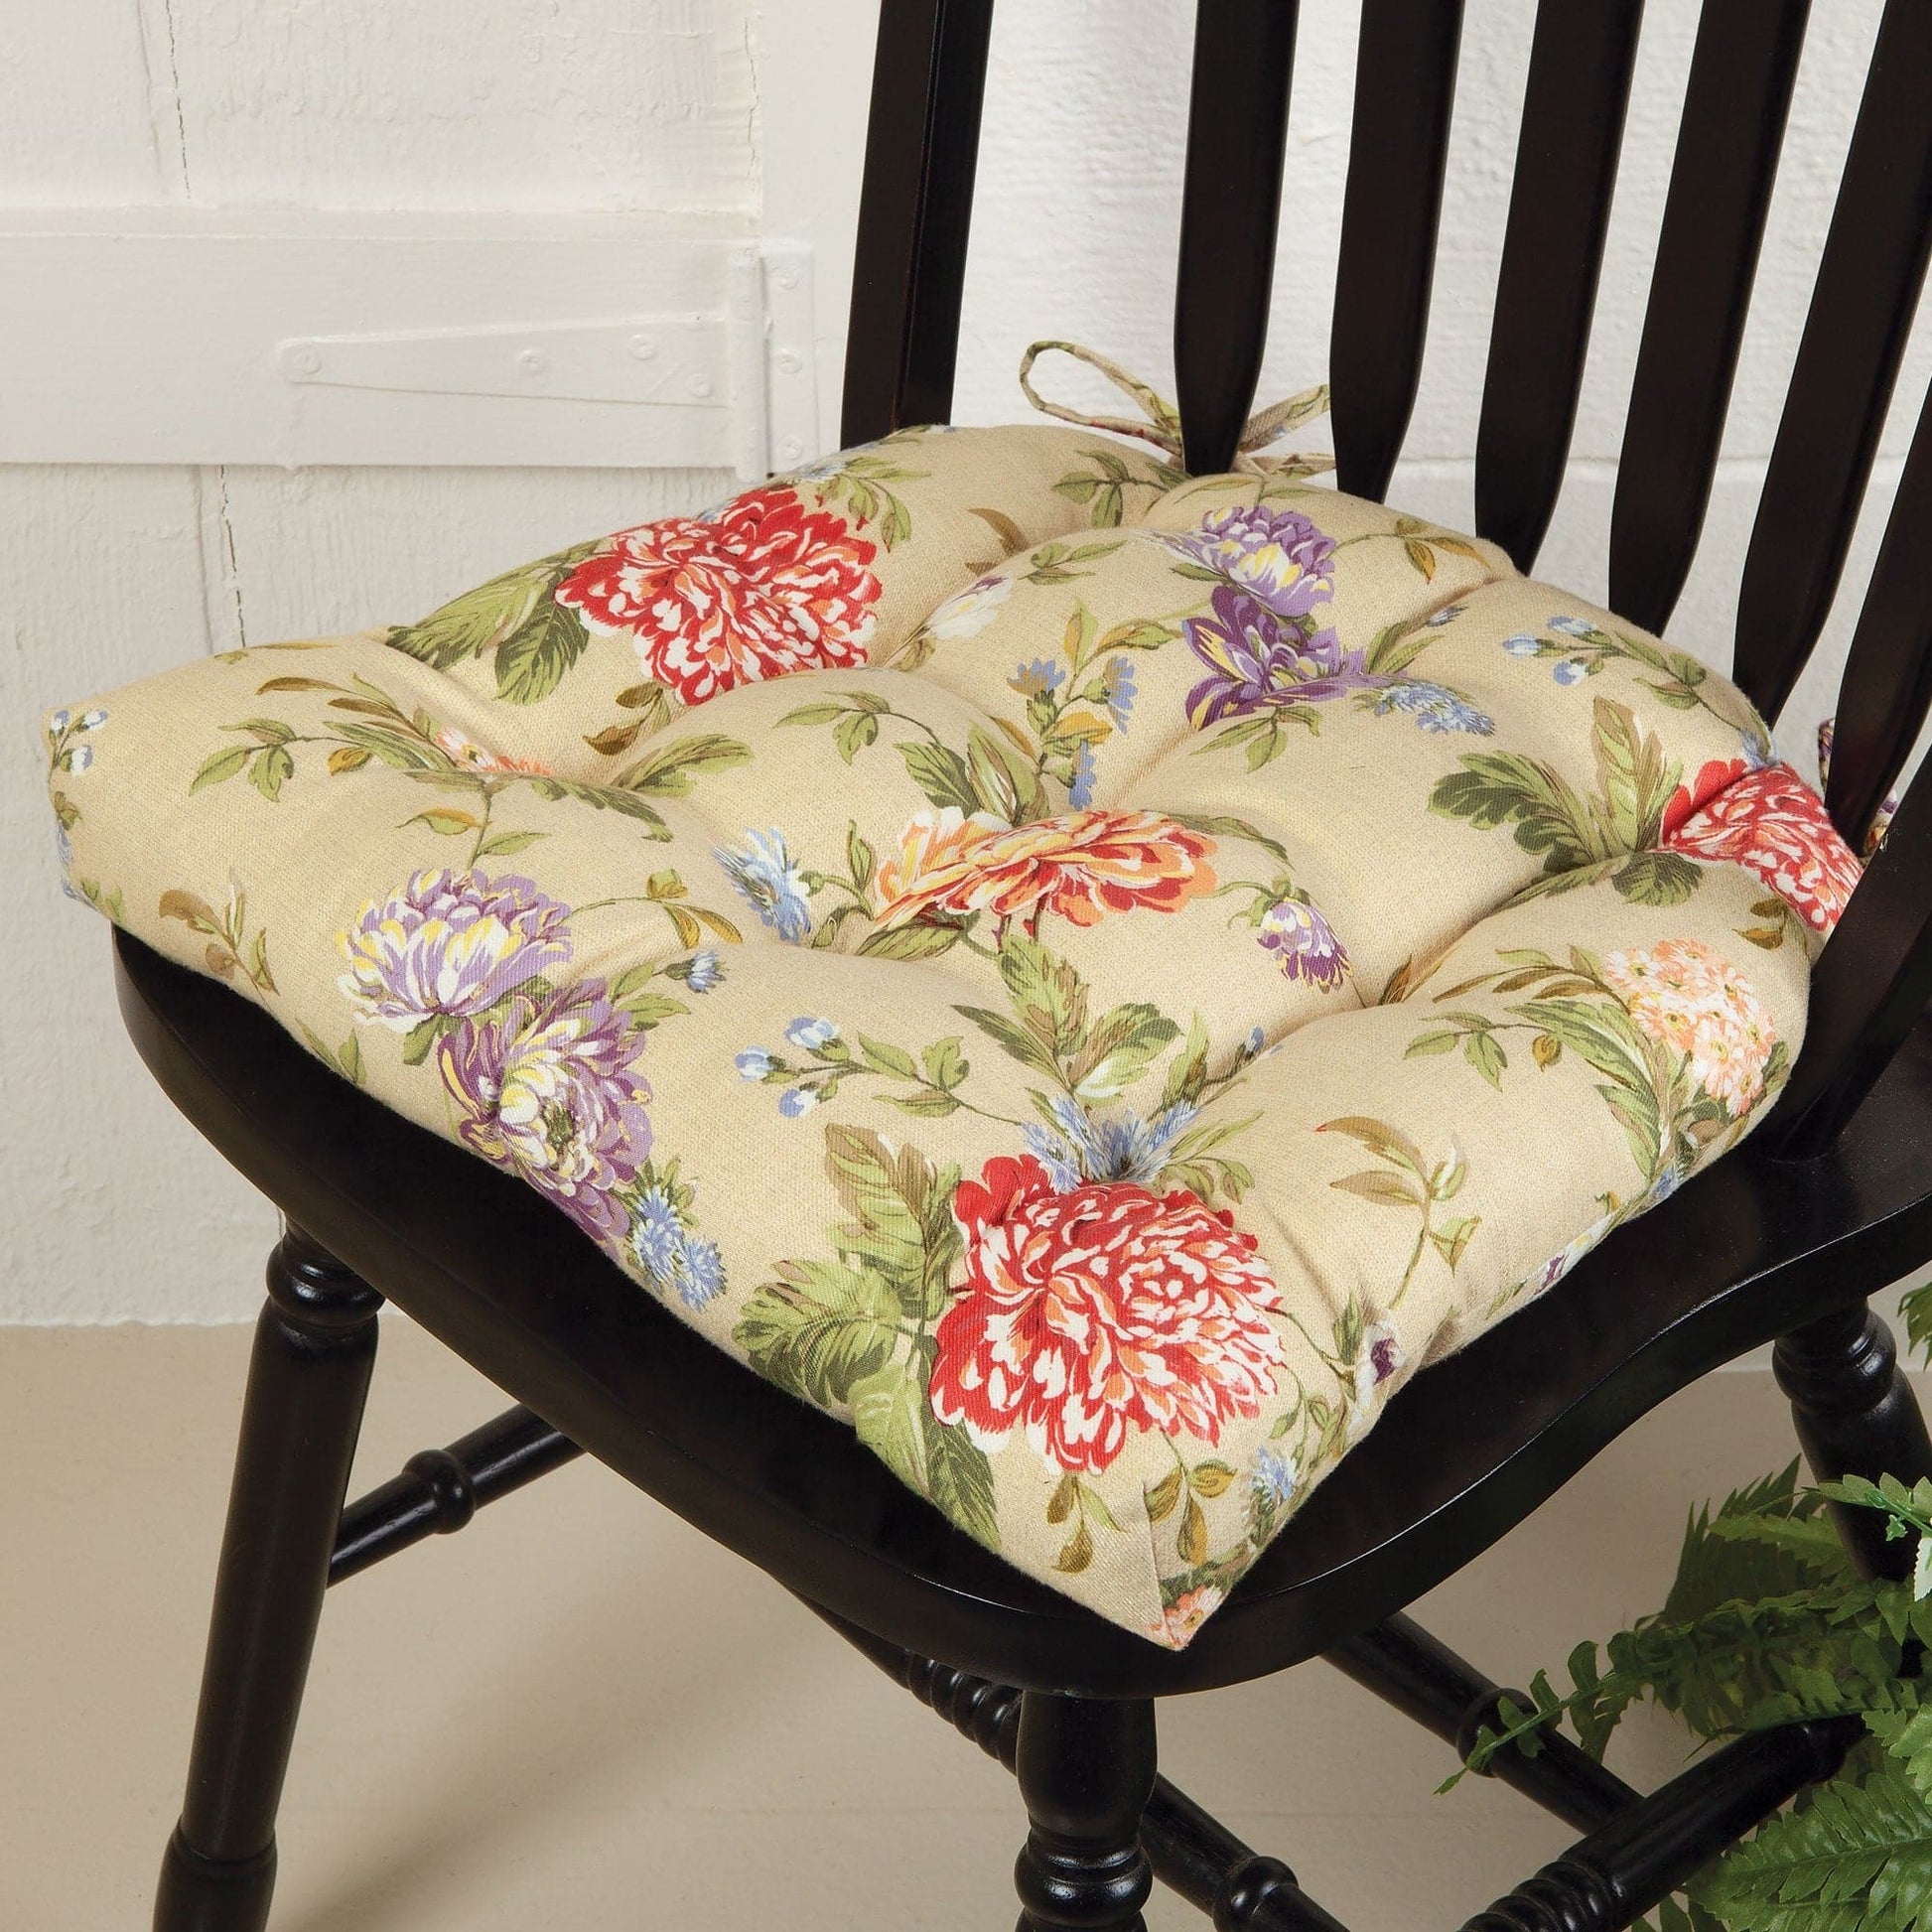 floral dining chair pad from sturbridge yankee with red and purple flowers on beige background